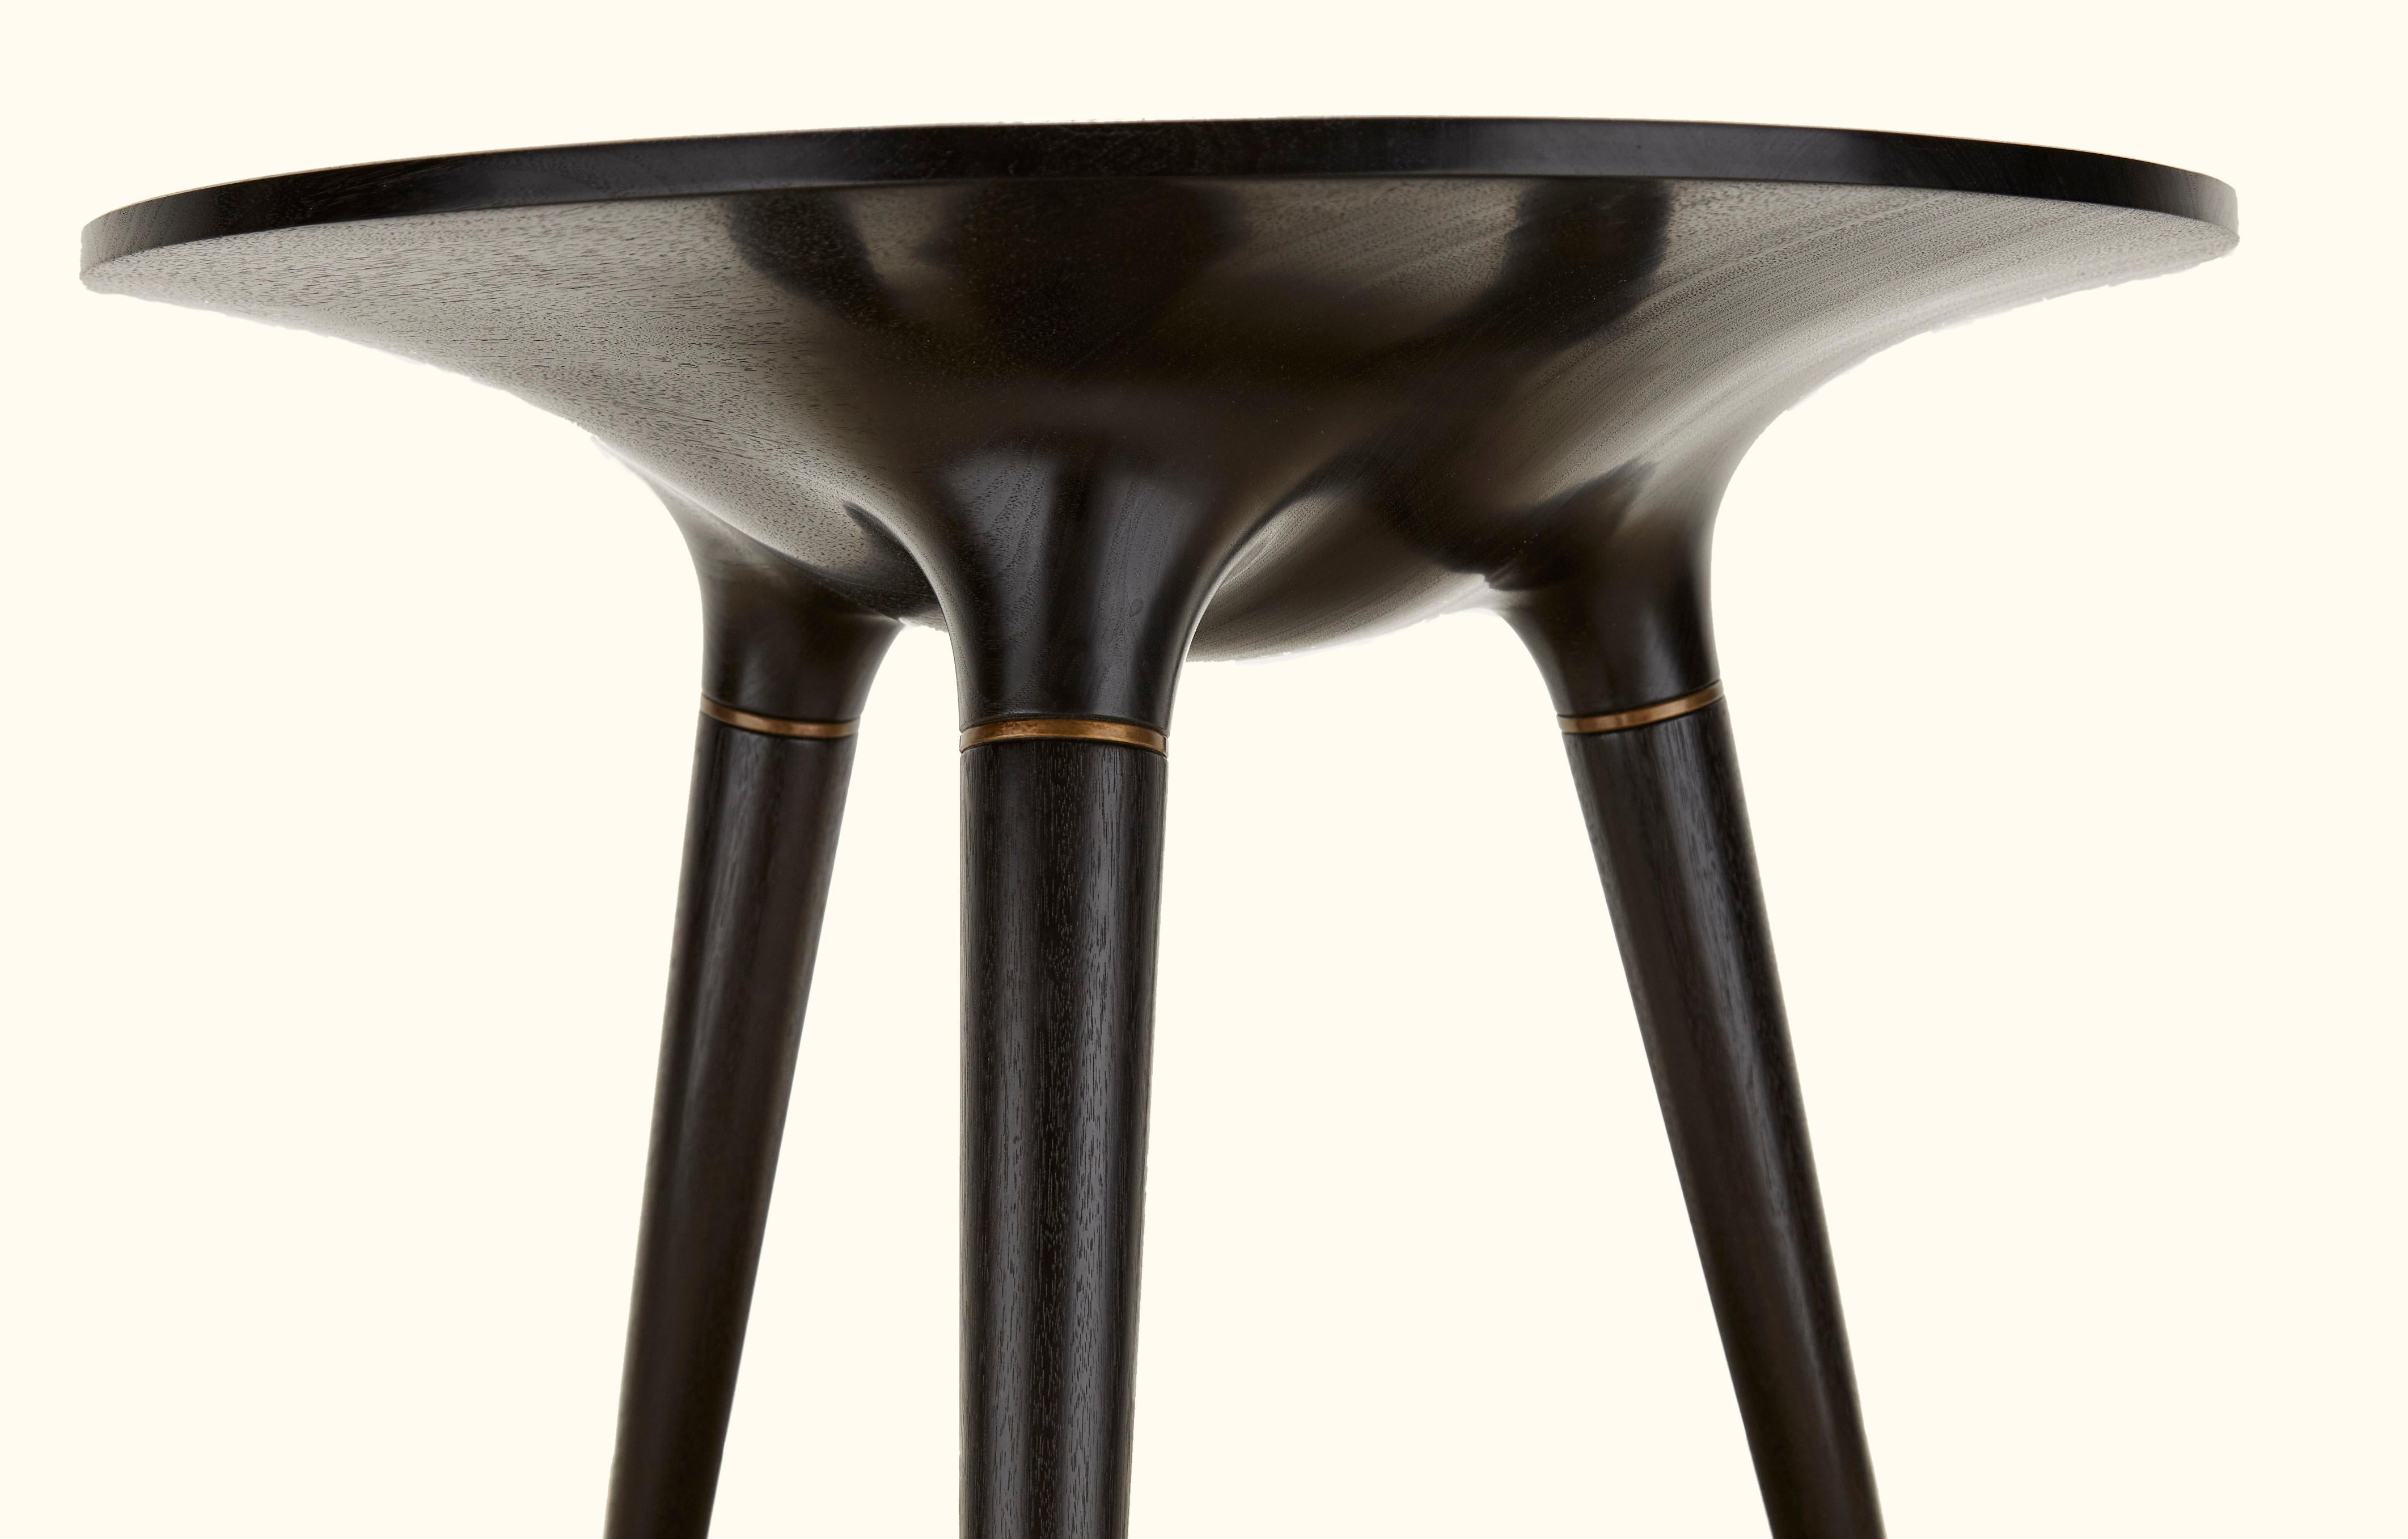 Mid-Century Modern Occasional Table 001 by Vincent Pocsik for Lawson-Fenning